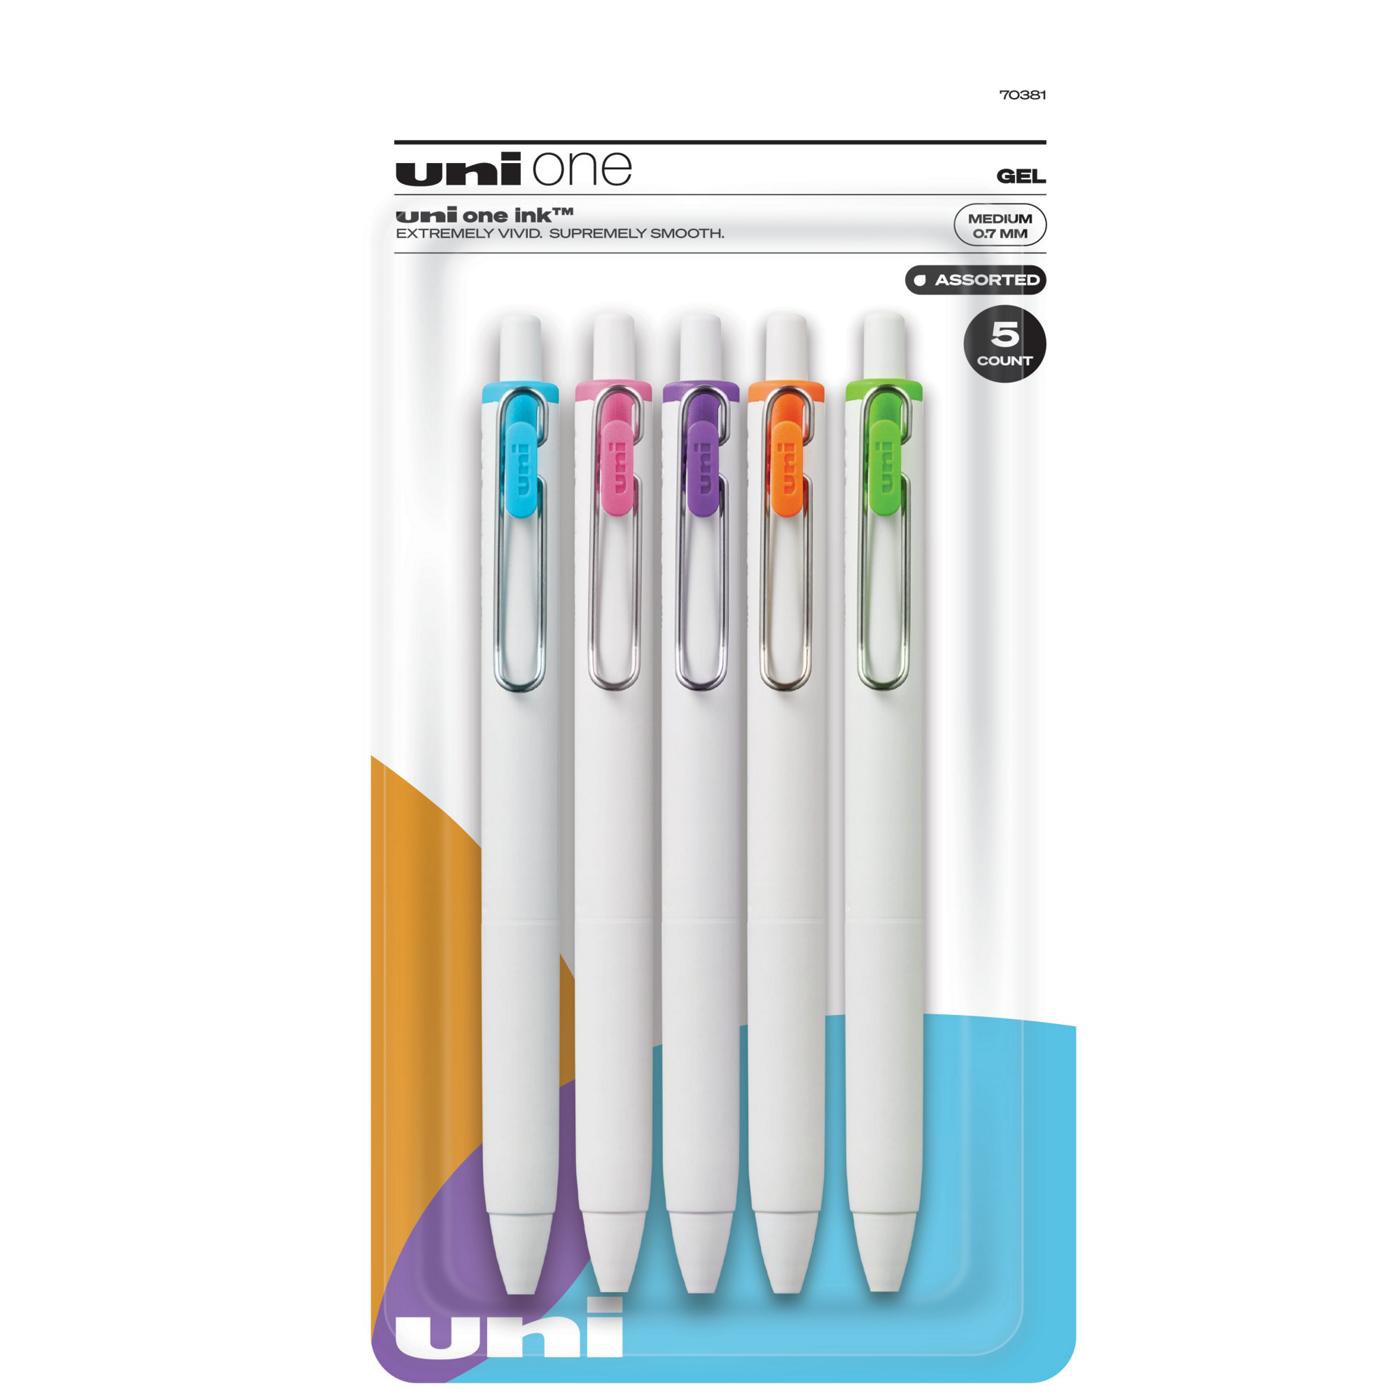 uniball One 0.7mm Retractable Gel Pens - Assorted Ink; image 1 of 10